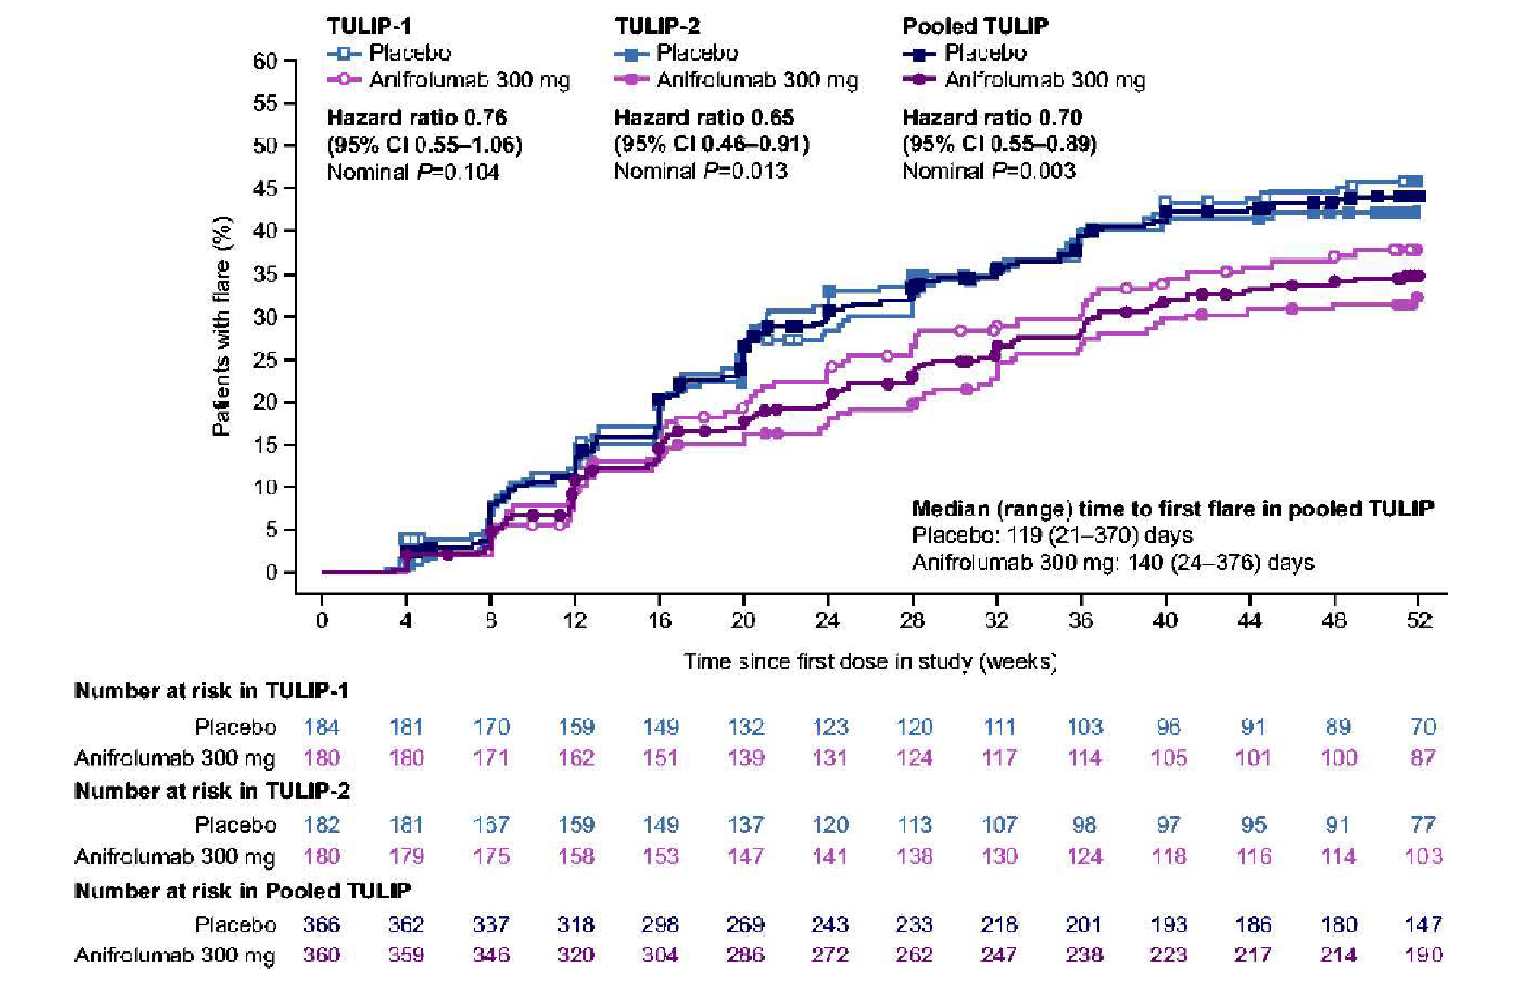 Graph of time to first flare in the TULIP-1 trial, TULIP-2 trial, and pooled TULIP data. The median time to first flare, assessed using the BILAG-2004 scoring method with standard flare analysis, was 140 days for patients receiving anifrolumab (range 24 to 376 days) versus 119 days for placebo (range 21 to 370 days) with a hazard ratio of 0.70 (95% CI, 0.55 to 0.89) with a P value of 0.003.